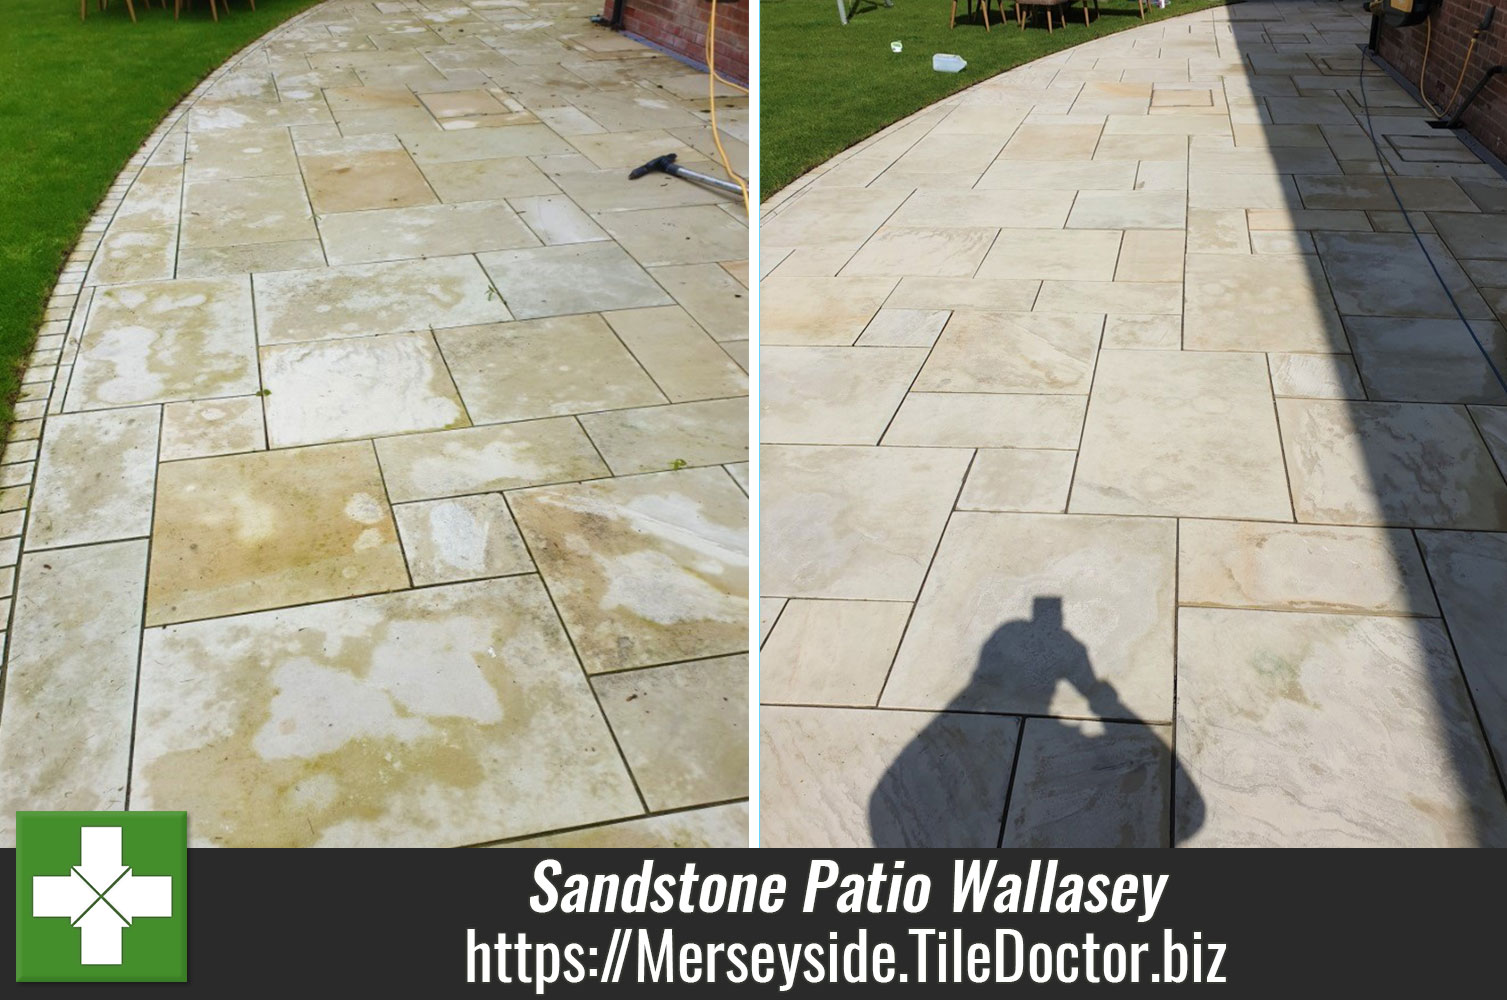 Deep Cleaning White Sandstone Pavers with Tile Doctor Patio and Driveway Cleaner in Wallasey Merseyside